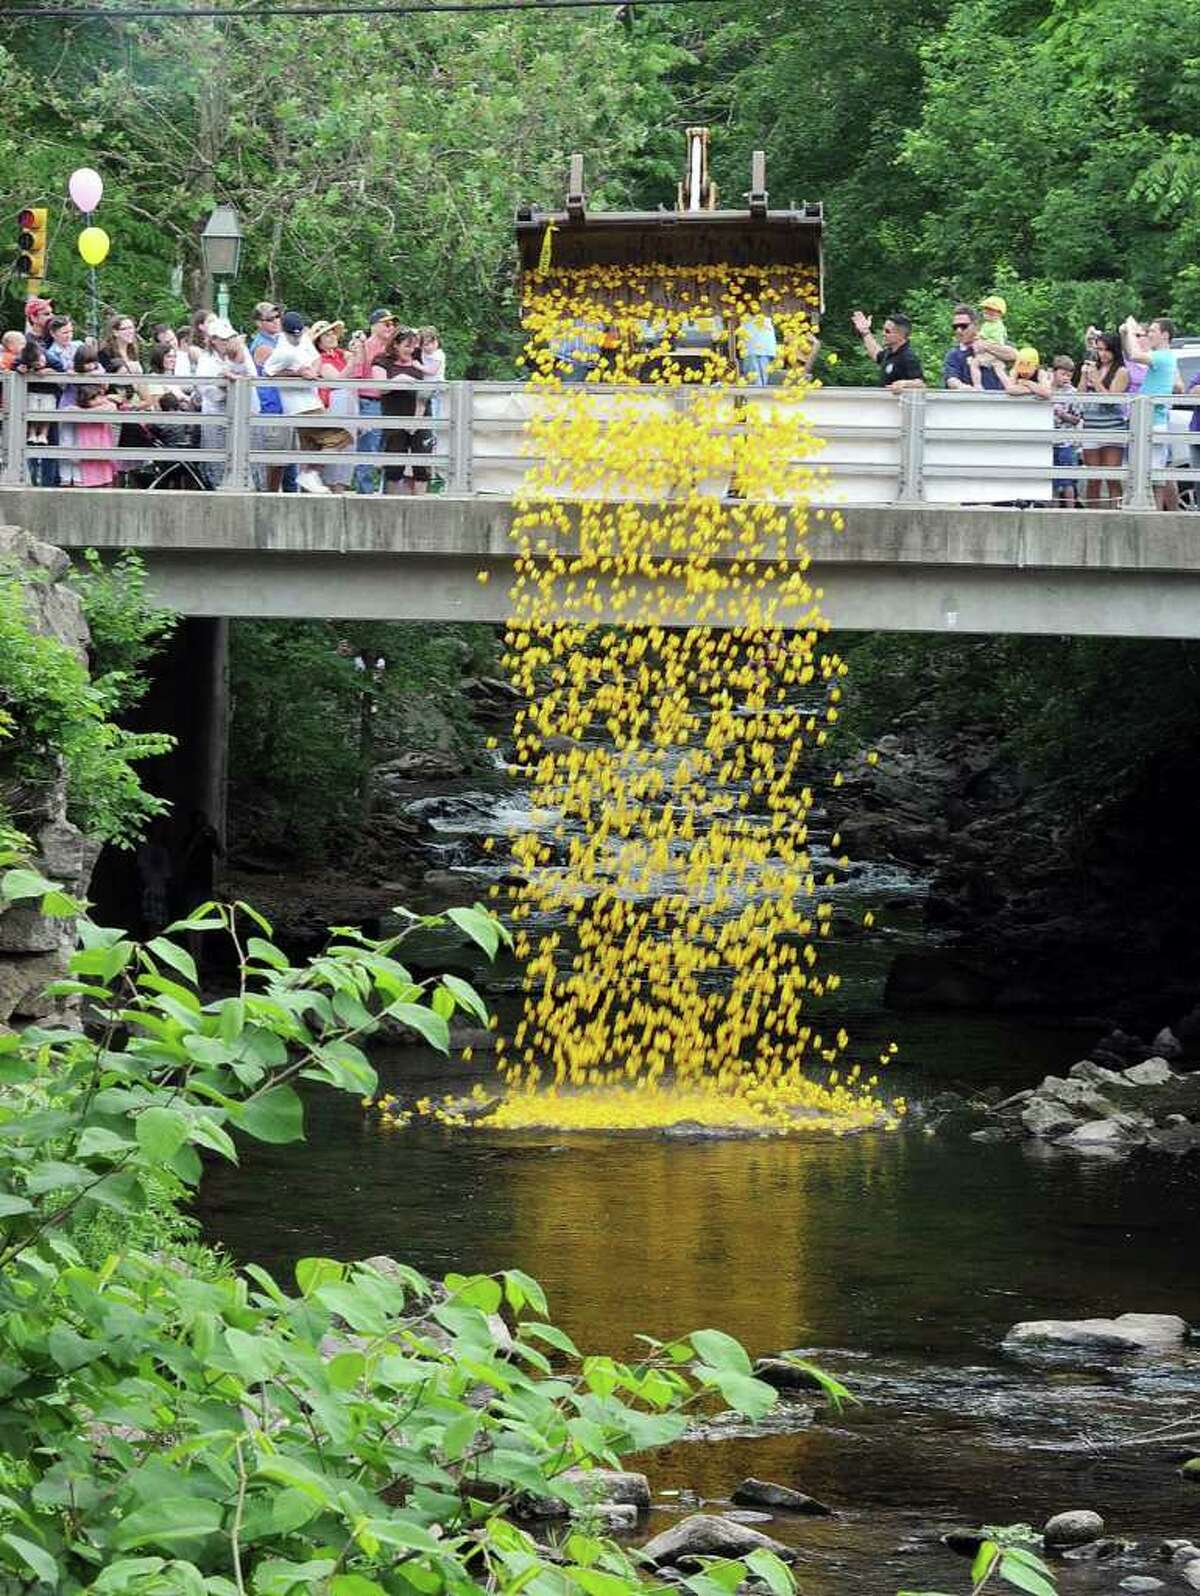 Almost 4,000 rubber ducks will be released for the Annual Newtown Lions Club Duck Race. The event is a Lion's Club fundraiser, with proceeds from donations going to various charities. The duck release is one of many attractions during a day of entertainment and family fun.